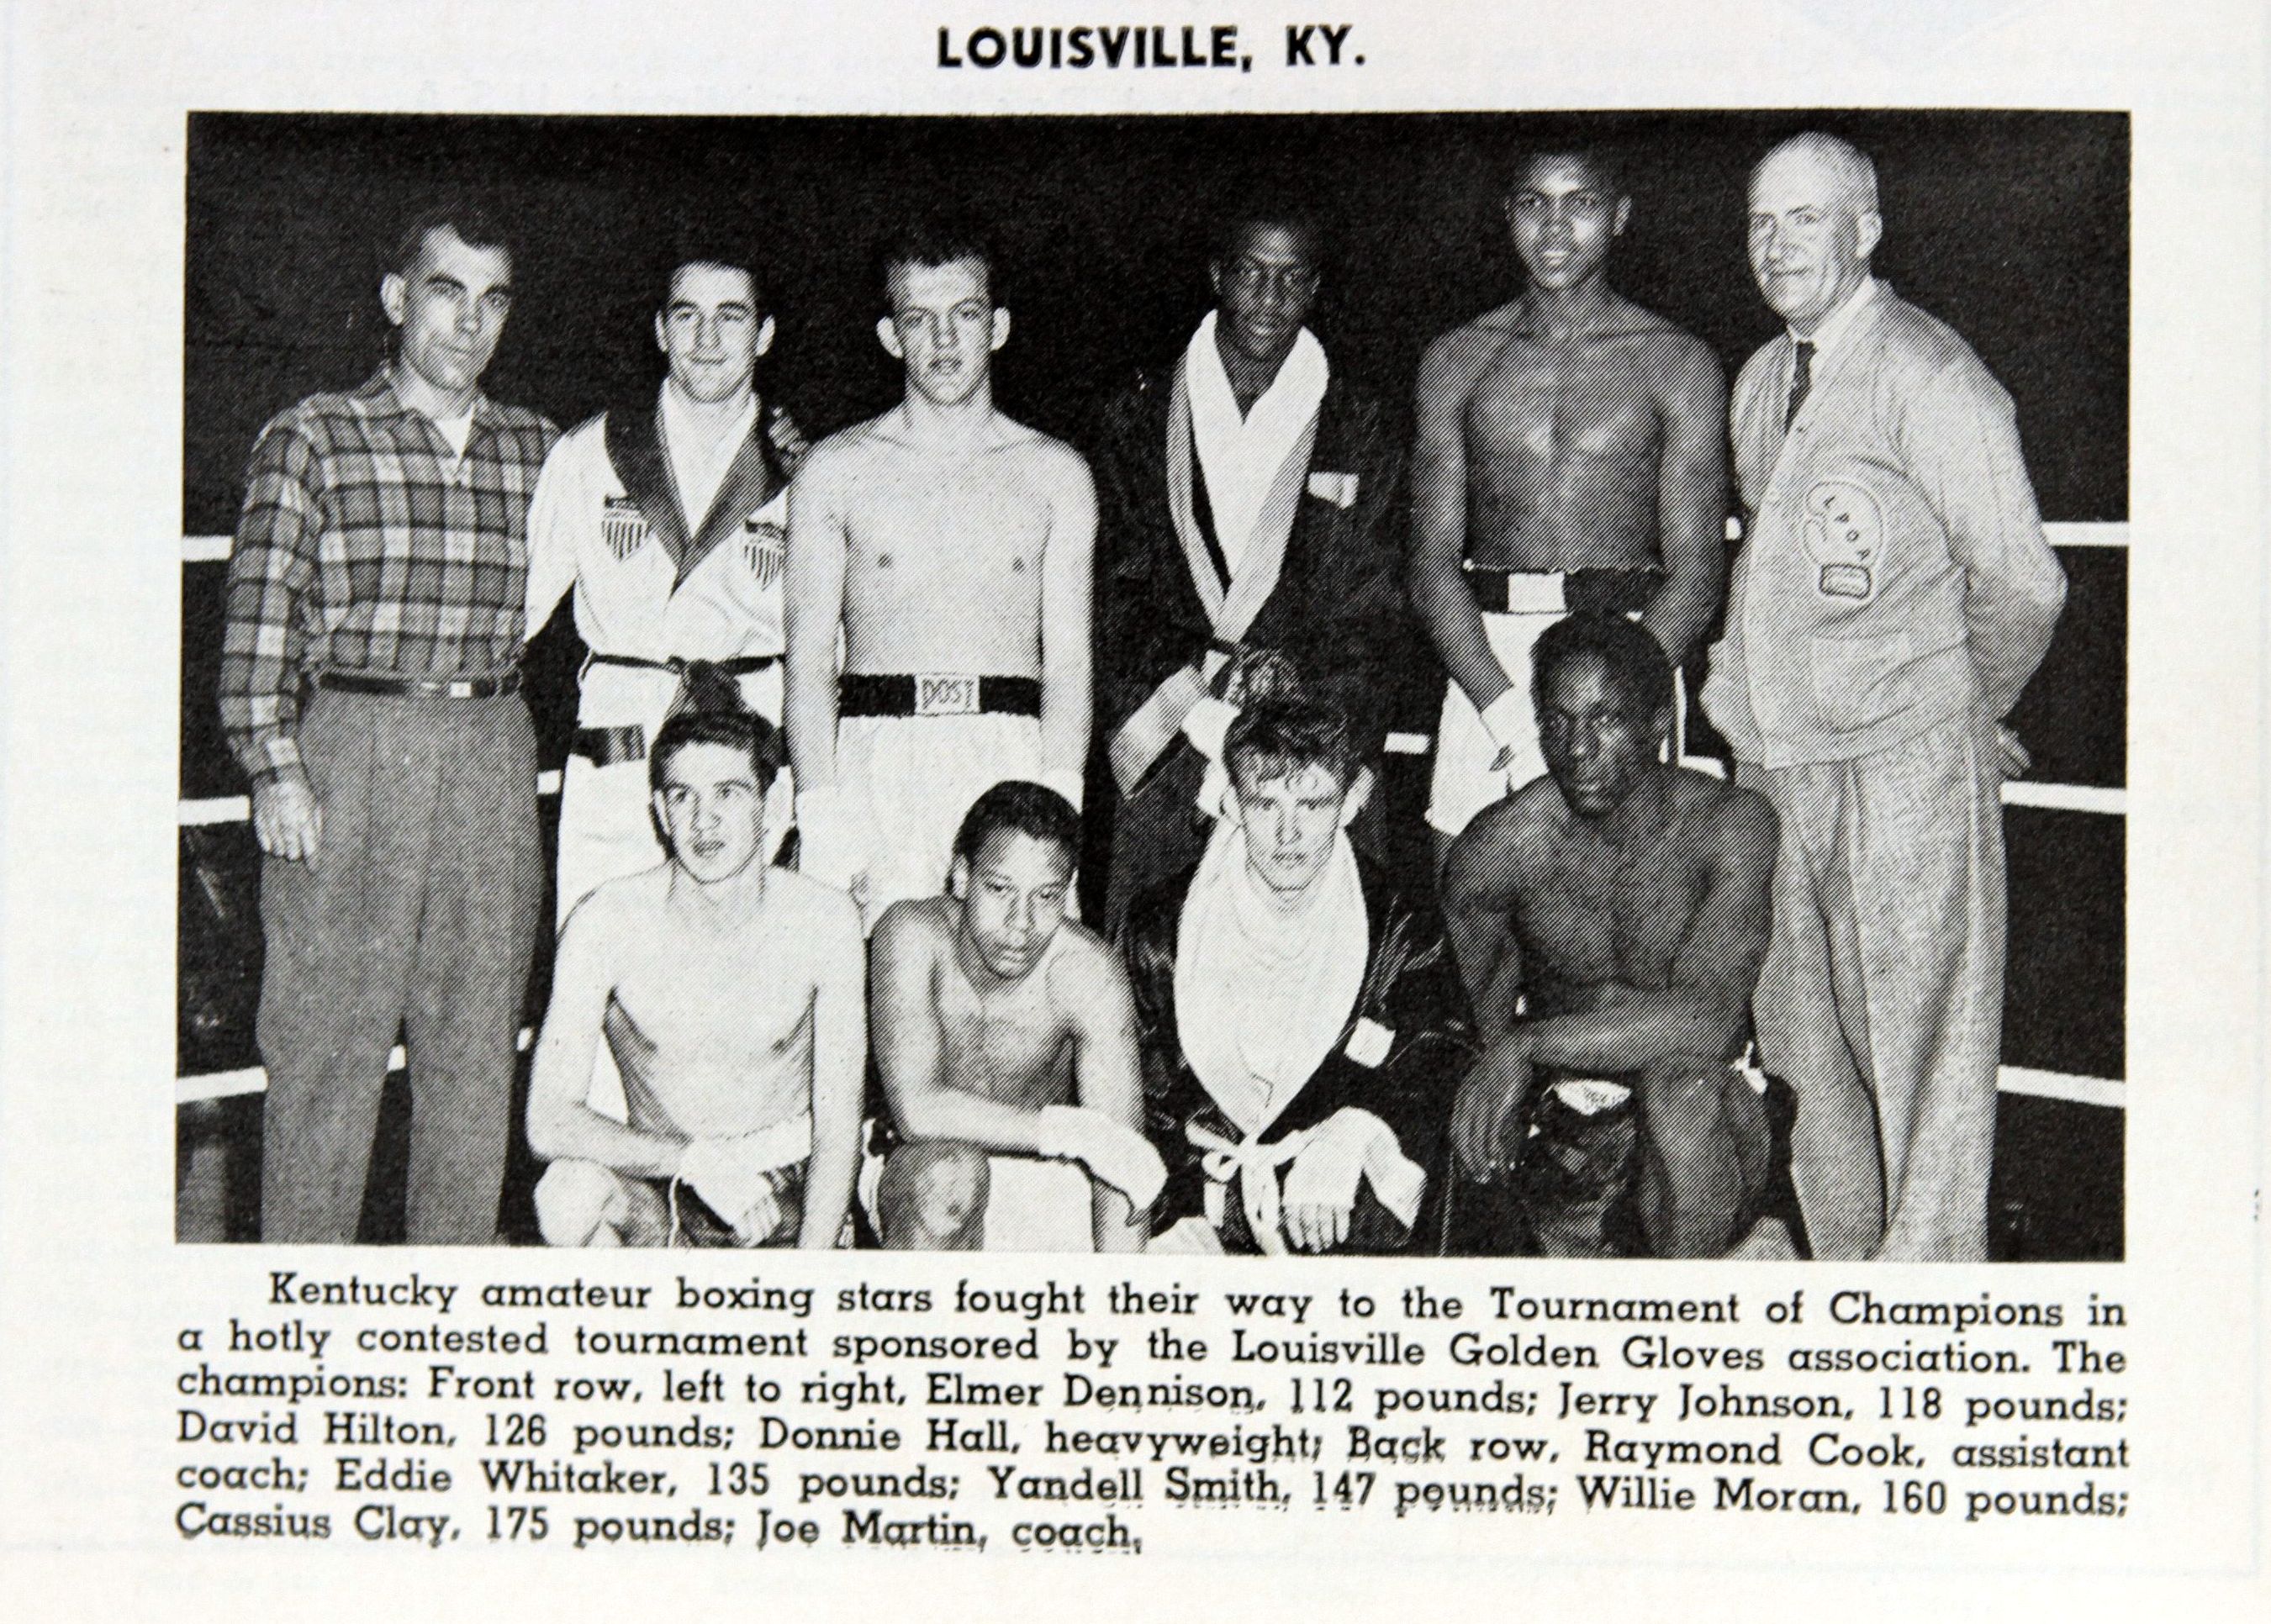 Fight Program Photo of Louisville Golden Gloves with young Cassius Clay.